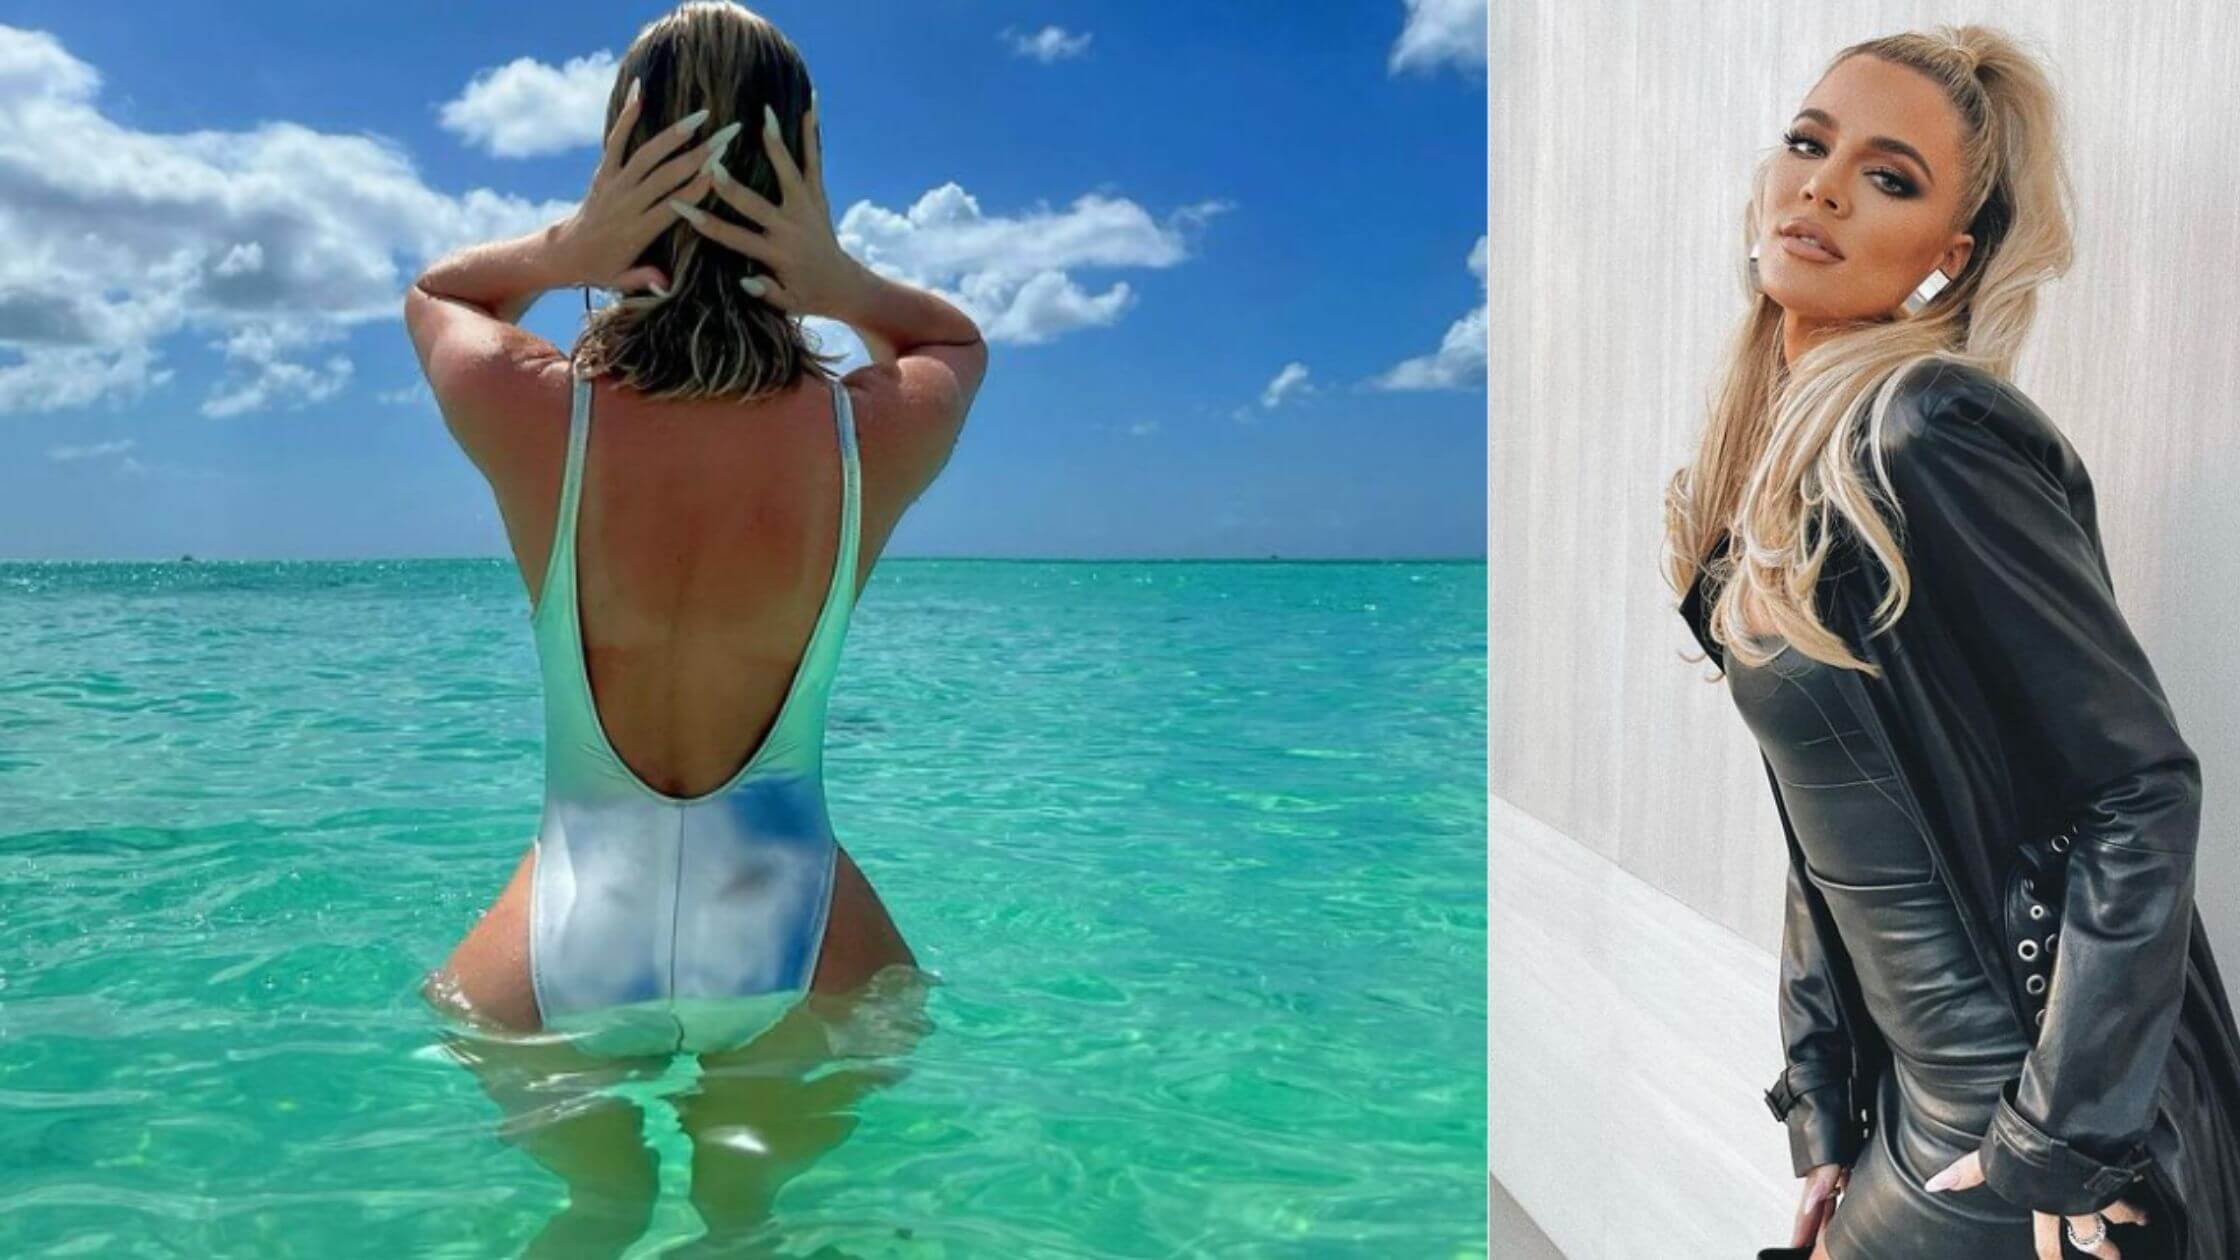 Khloe Kardashian Wears a Sexy Swimsuit And Leaves A Hint About Not "Looking Back"